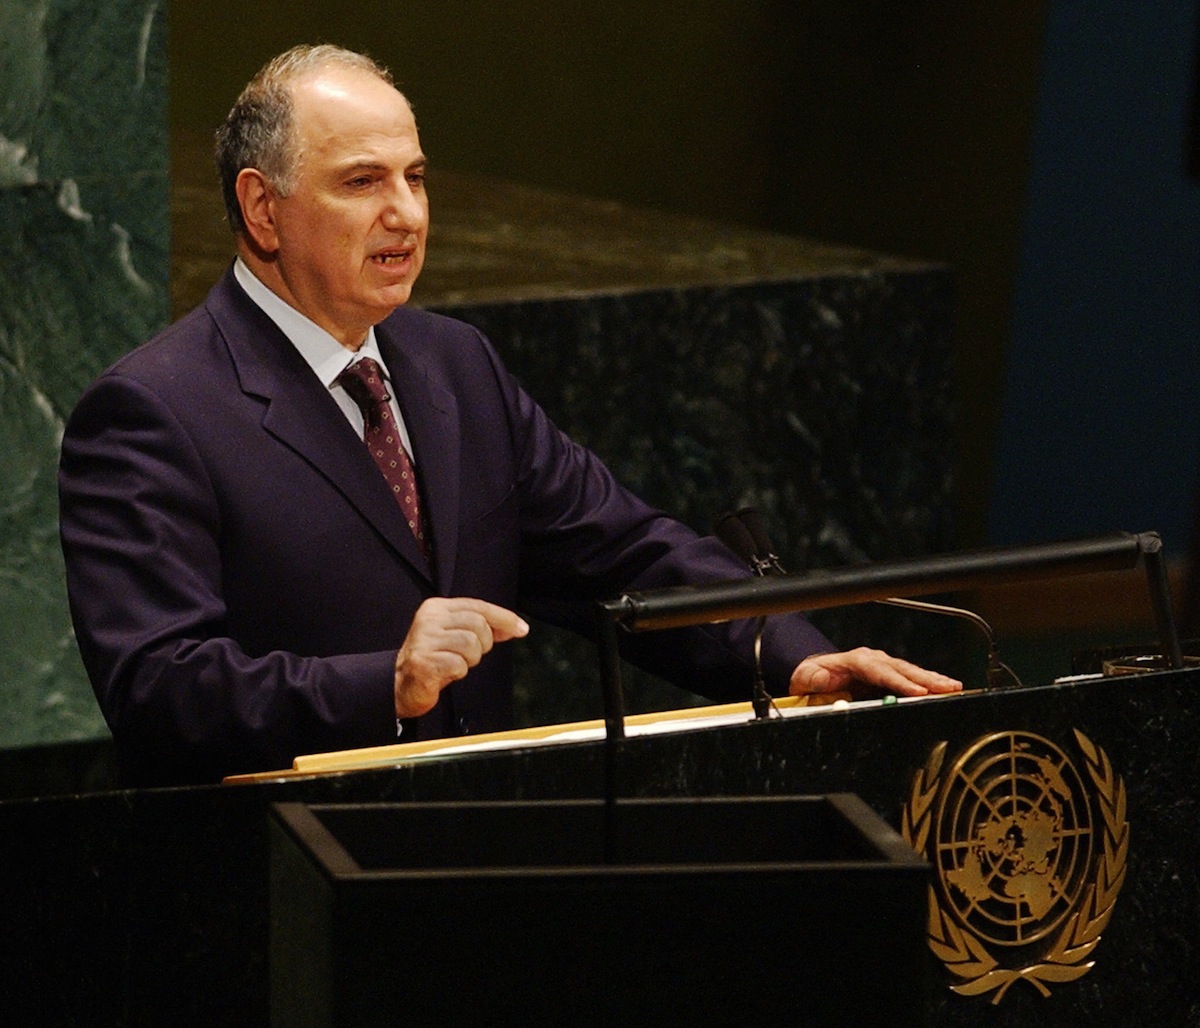 Ahmed Chalabi, one of nine rotating presidents of the Iraqi Governing Council, speaks to the 58th Session of the United Nations General Assembly, Oct. 2, 2003, at UN headquarters in New York. (Stan Honda—AFP/Getty Images)